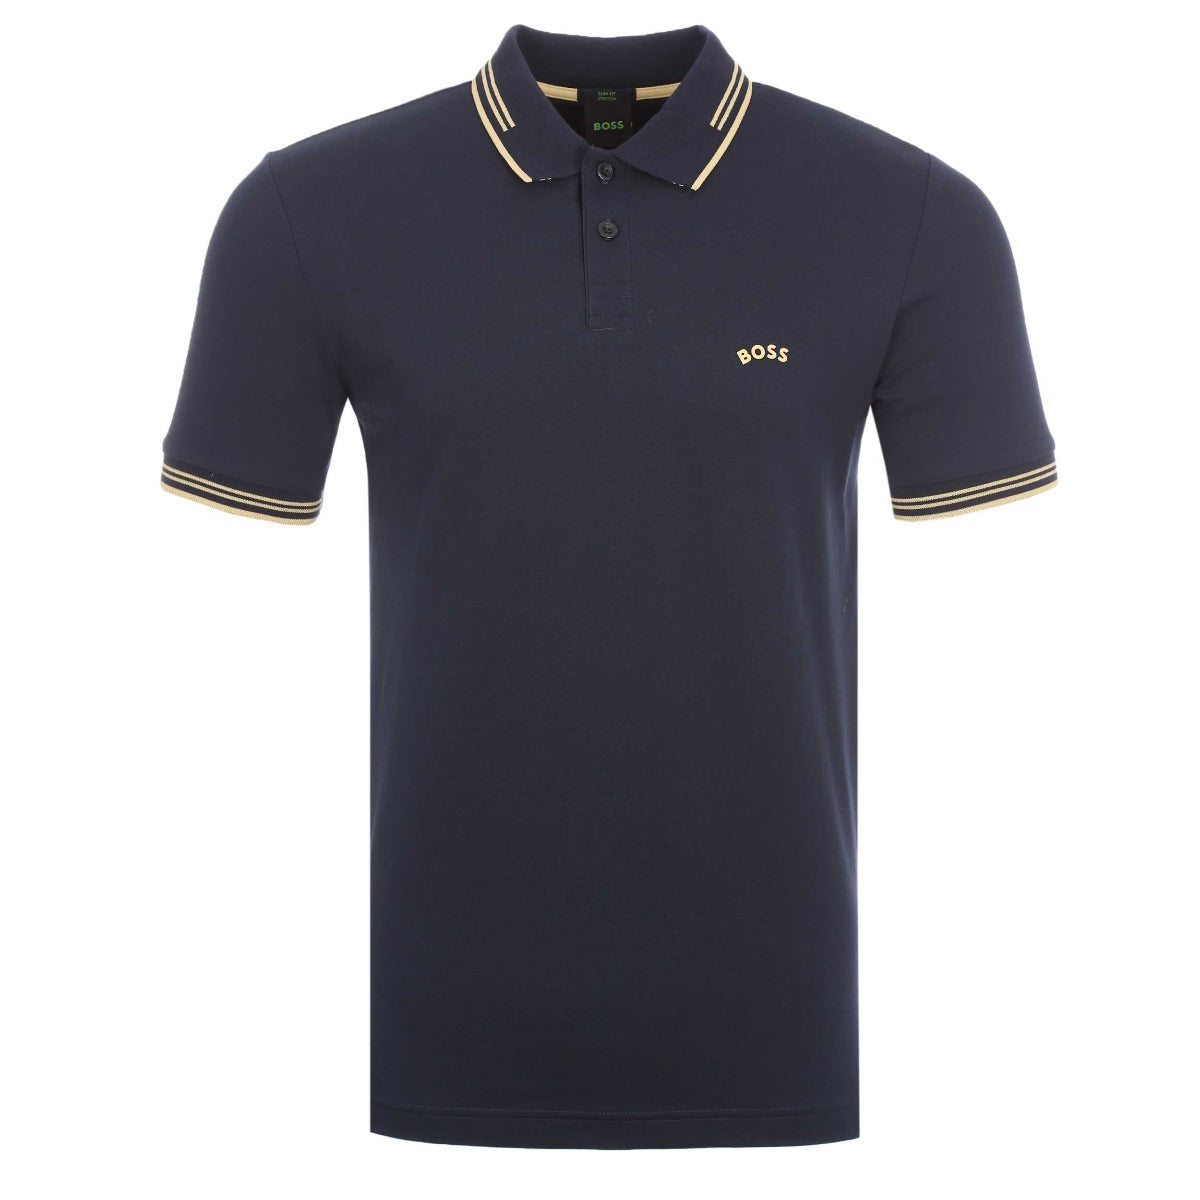 BOSS Paul Curved Polo Shirt in Navy & Gold